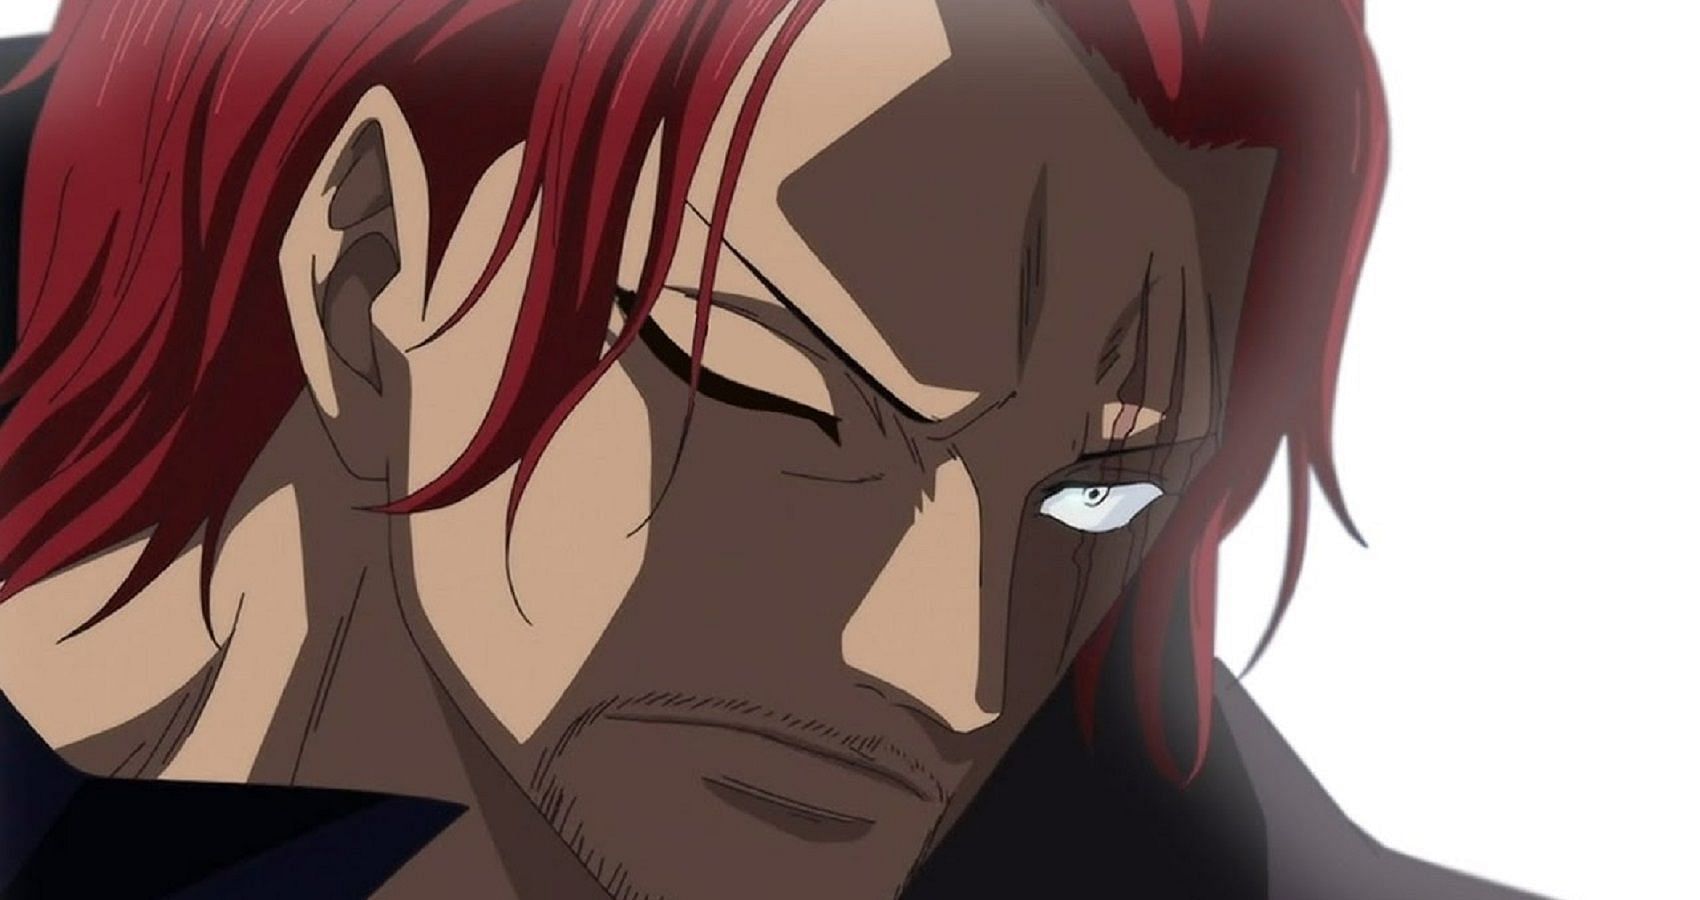 Red Haired Shanks, presumed protagonist of the new One Piece Red movie, seen here with a scowl on his face (Image via Toei Animation)